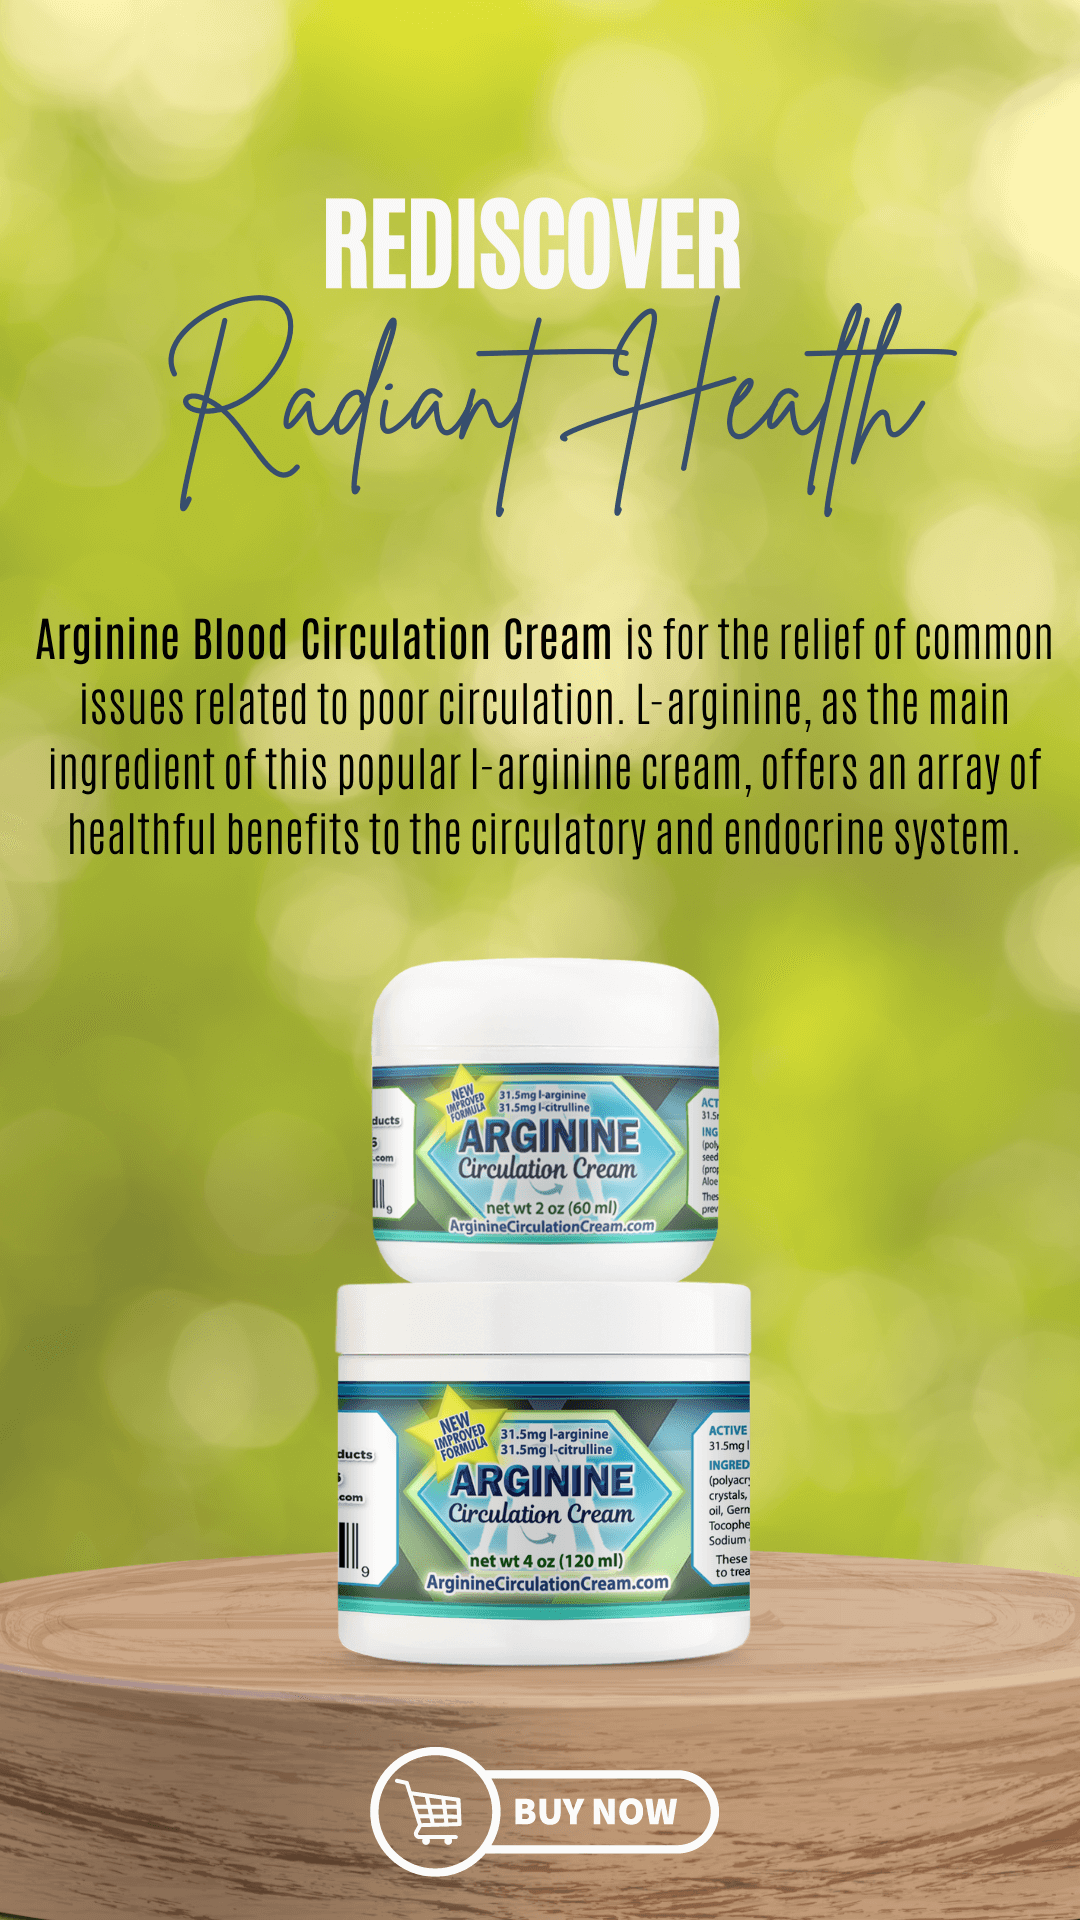 Experience the benefits of Arginine Circulation Cream! - New Hampshire - Manchester ID1546306 2